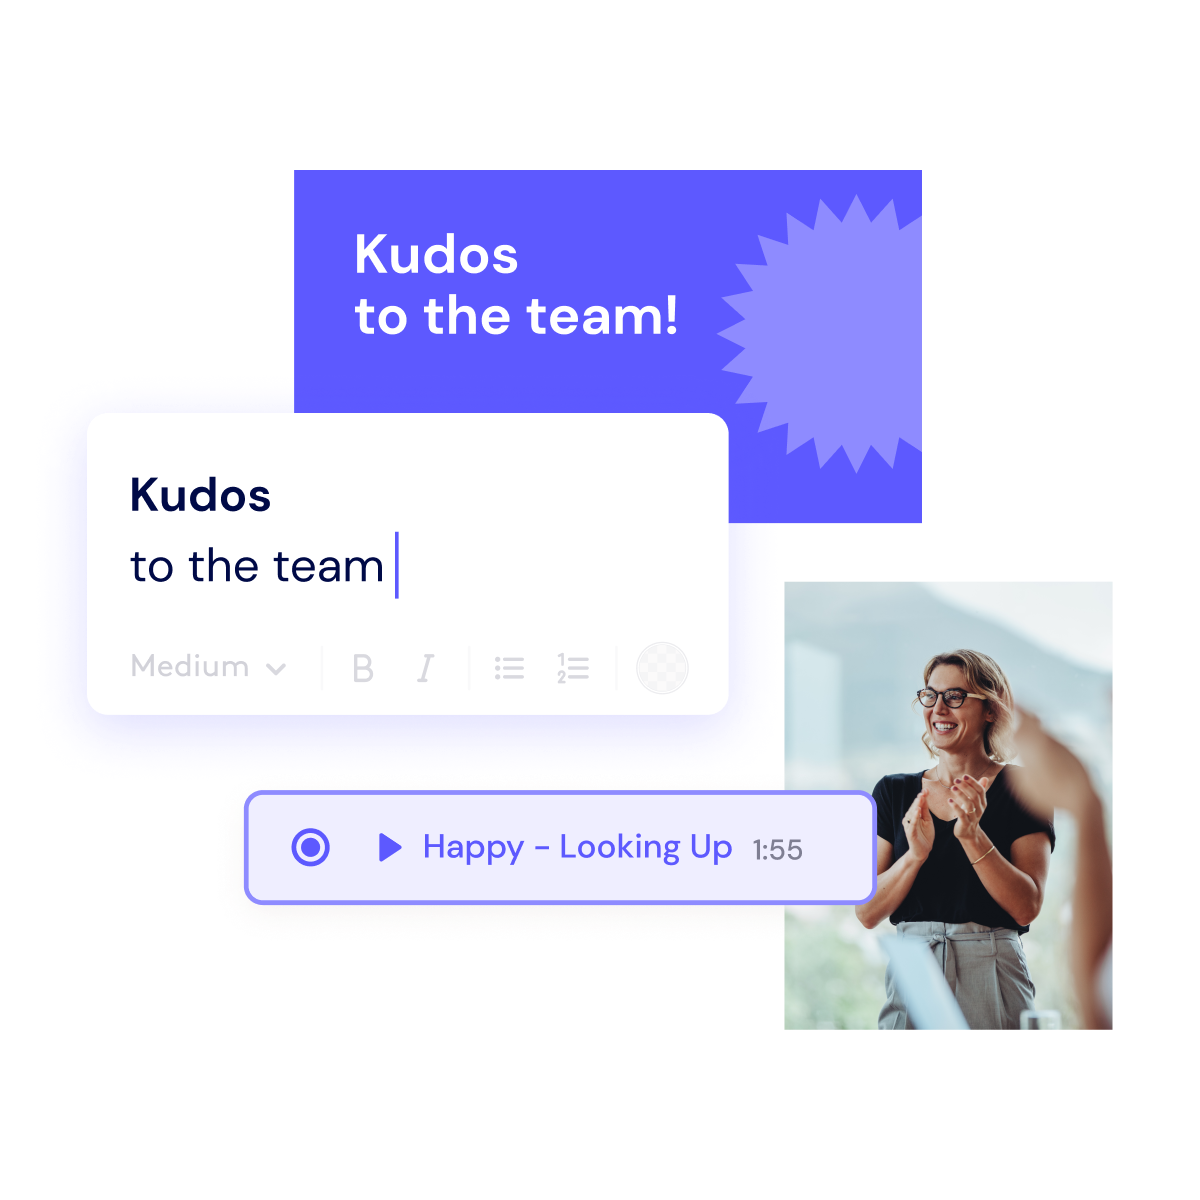 A collage displaying a digital 'kudos to the team!' message, an editor interface titled 'kudos', and a woman clapping hands and smiling.